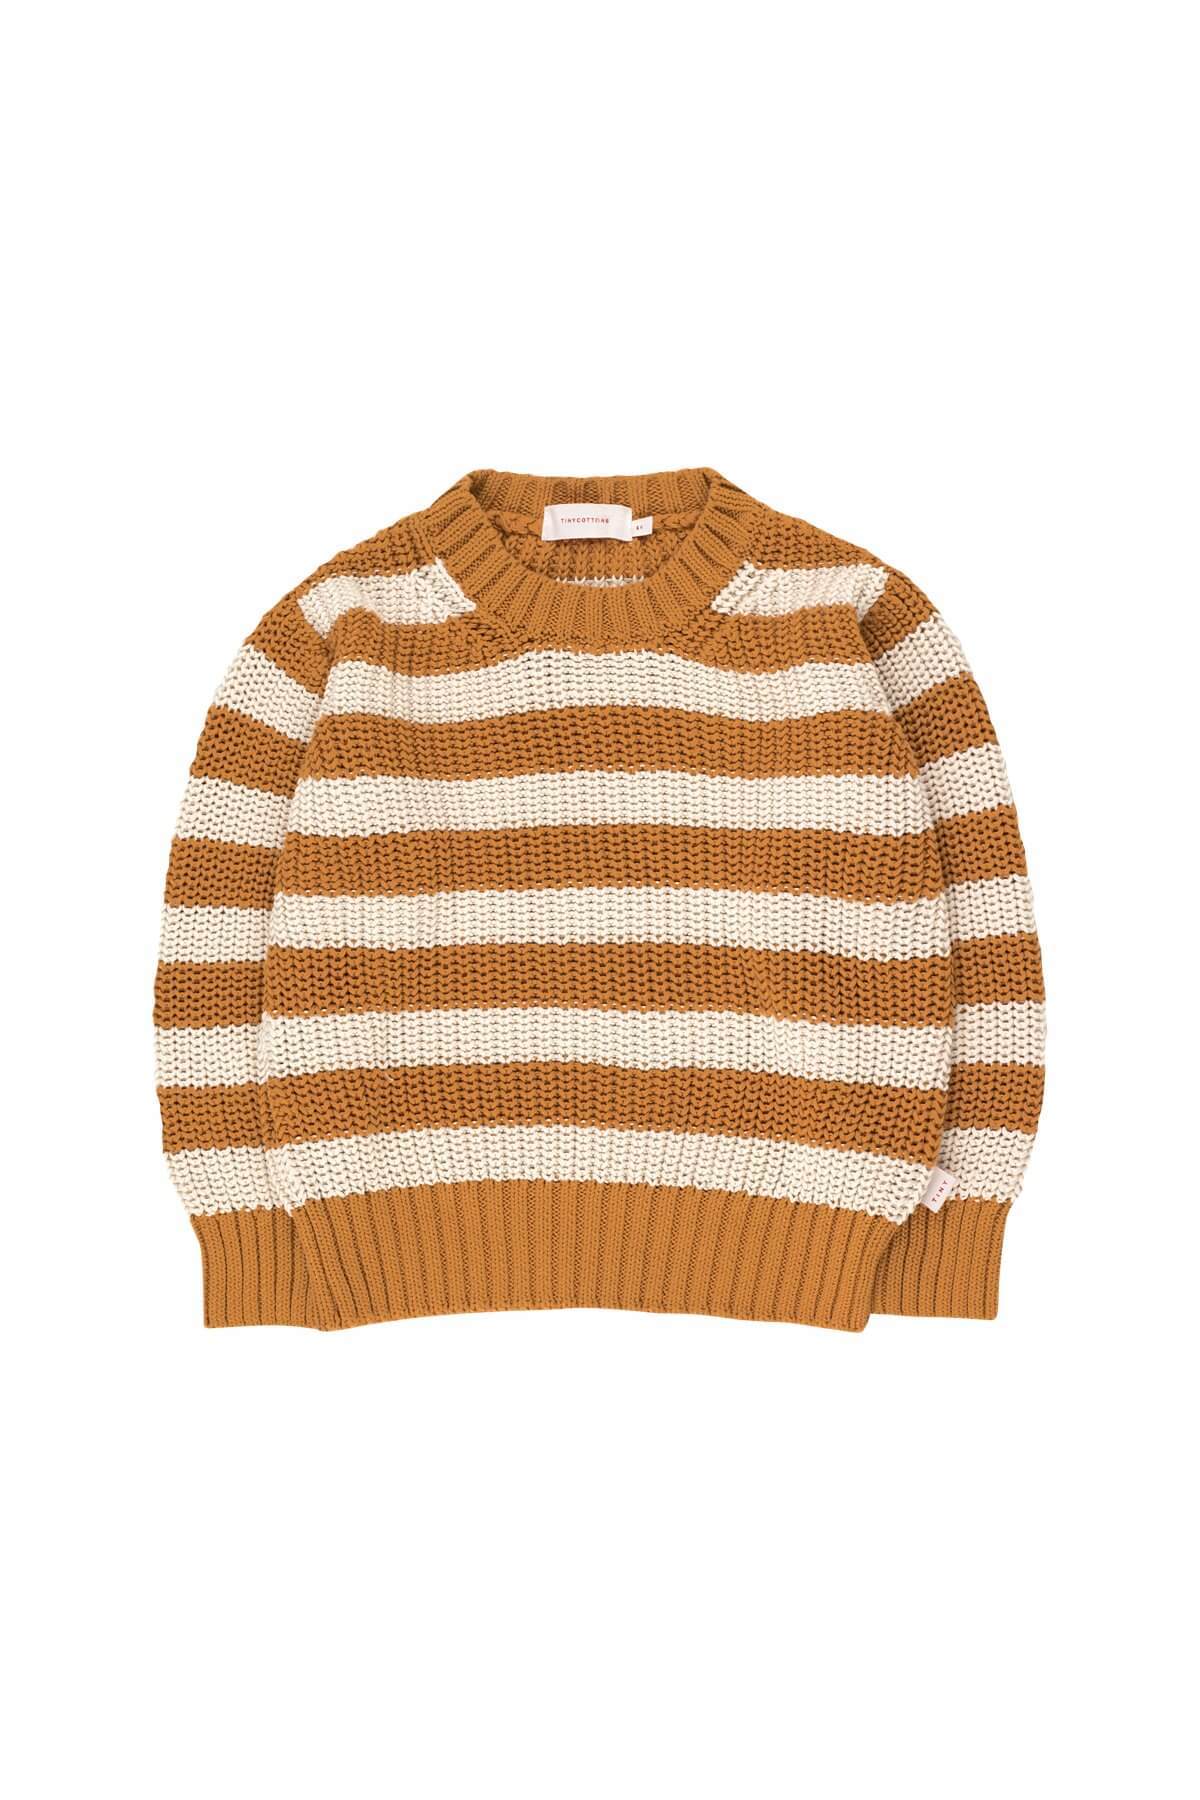 Tinycottons Stripes Sweater